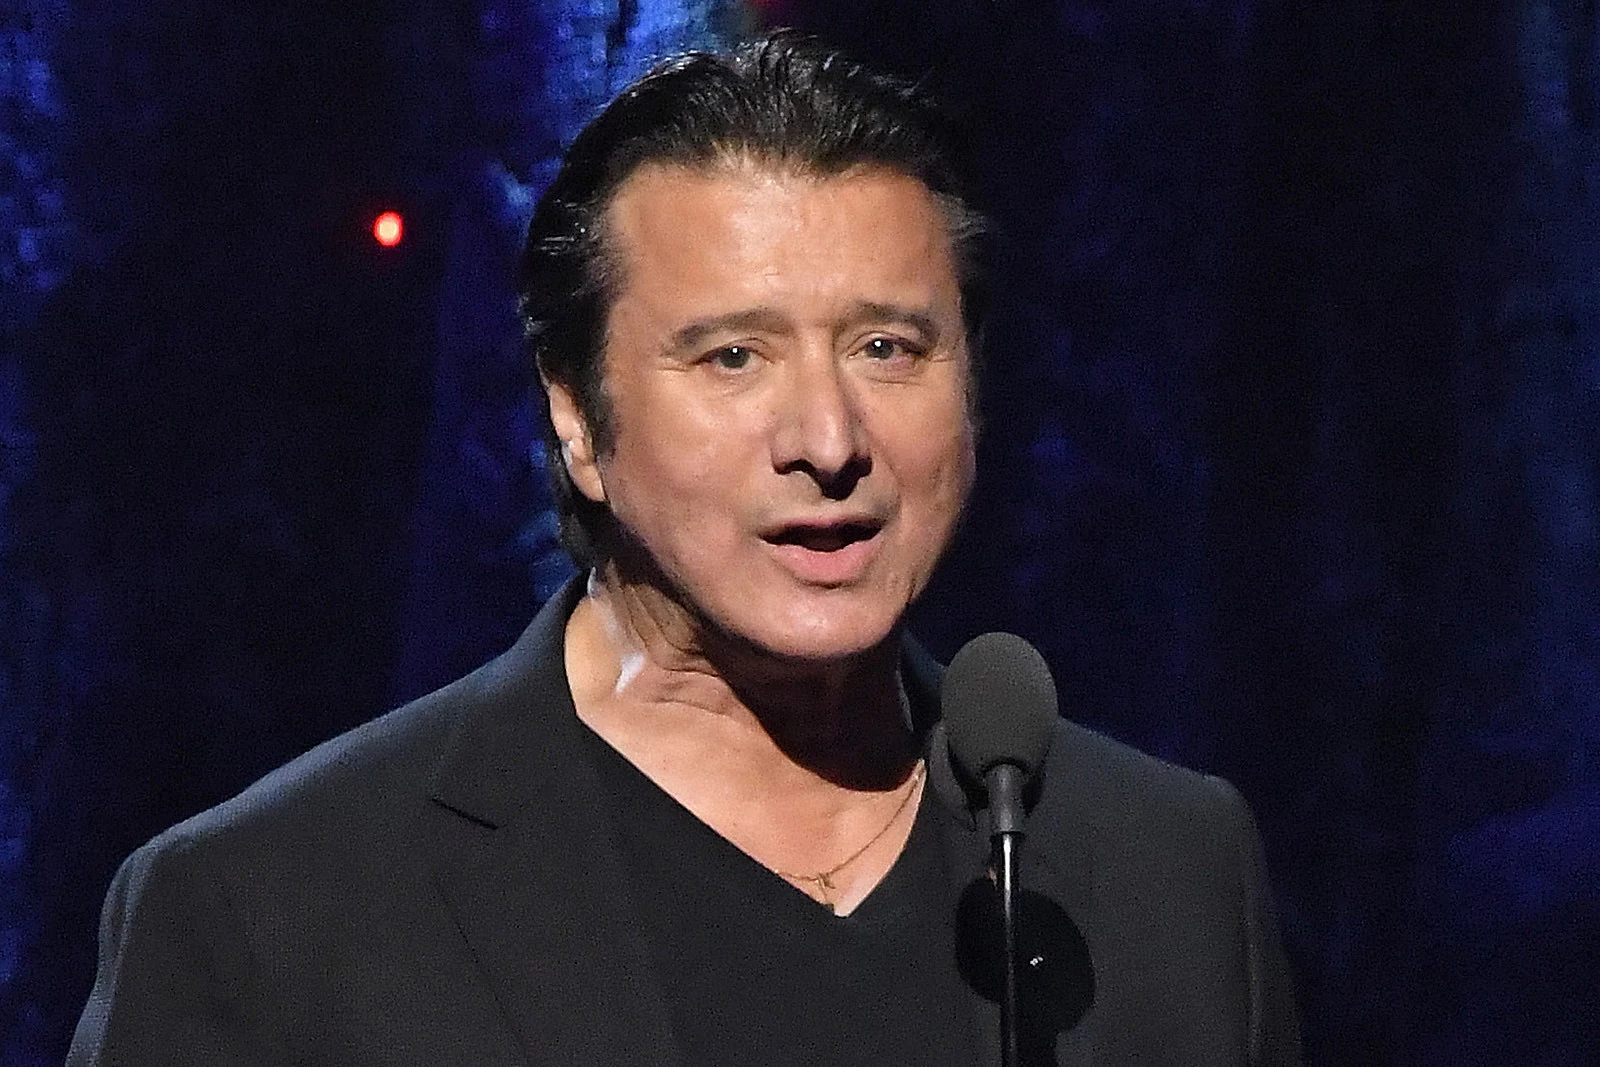 Watch: Steve Perry Previews New Holiday Song ‘Maybe This Year’